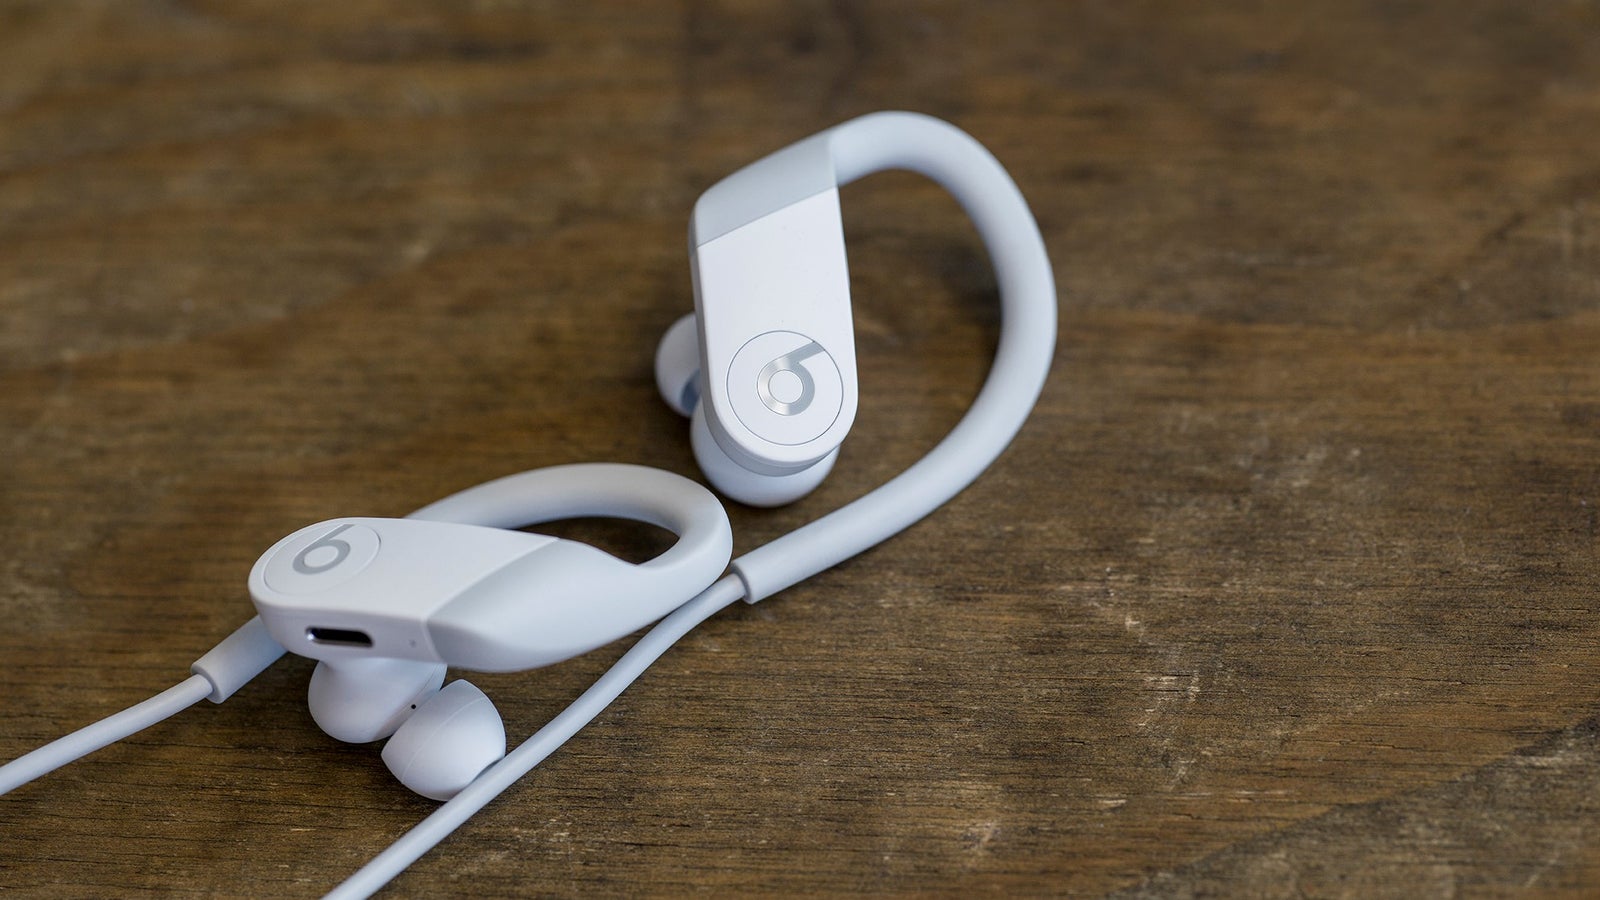 Apple’s latest sporty wireless earbuds are now official meet the Beats